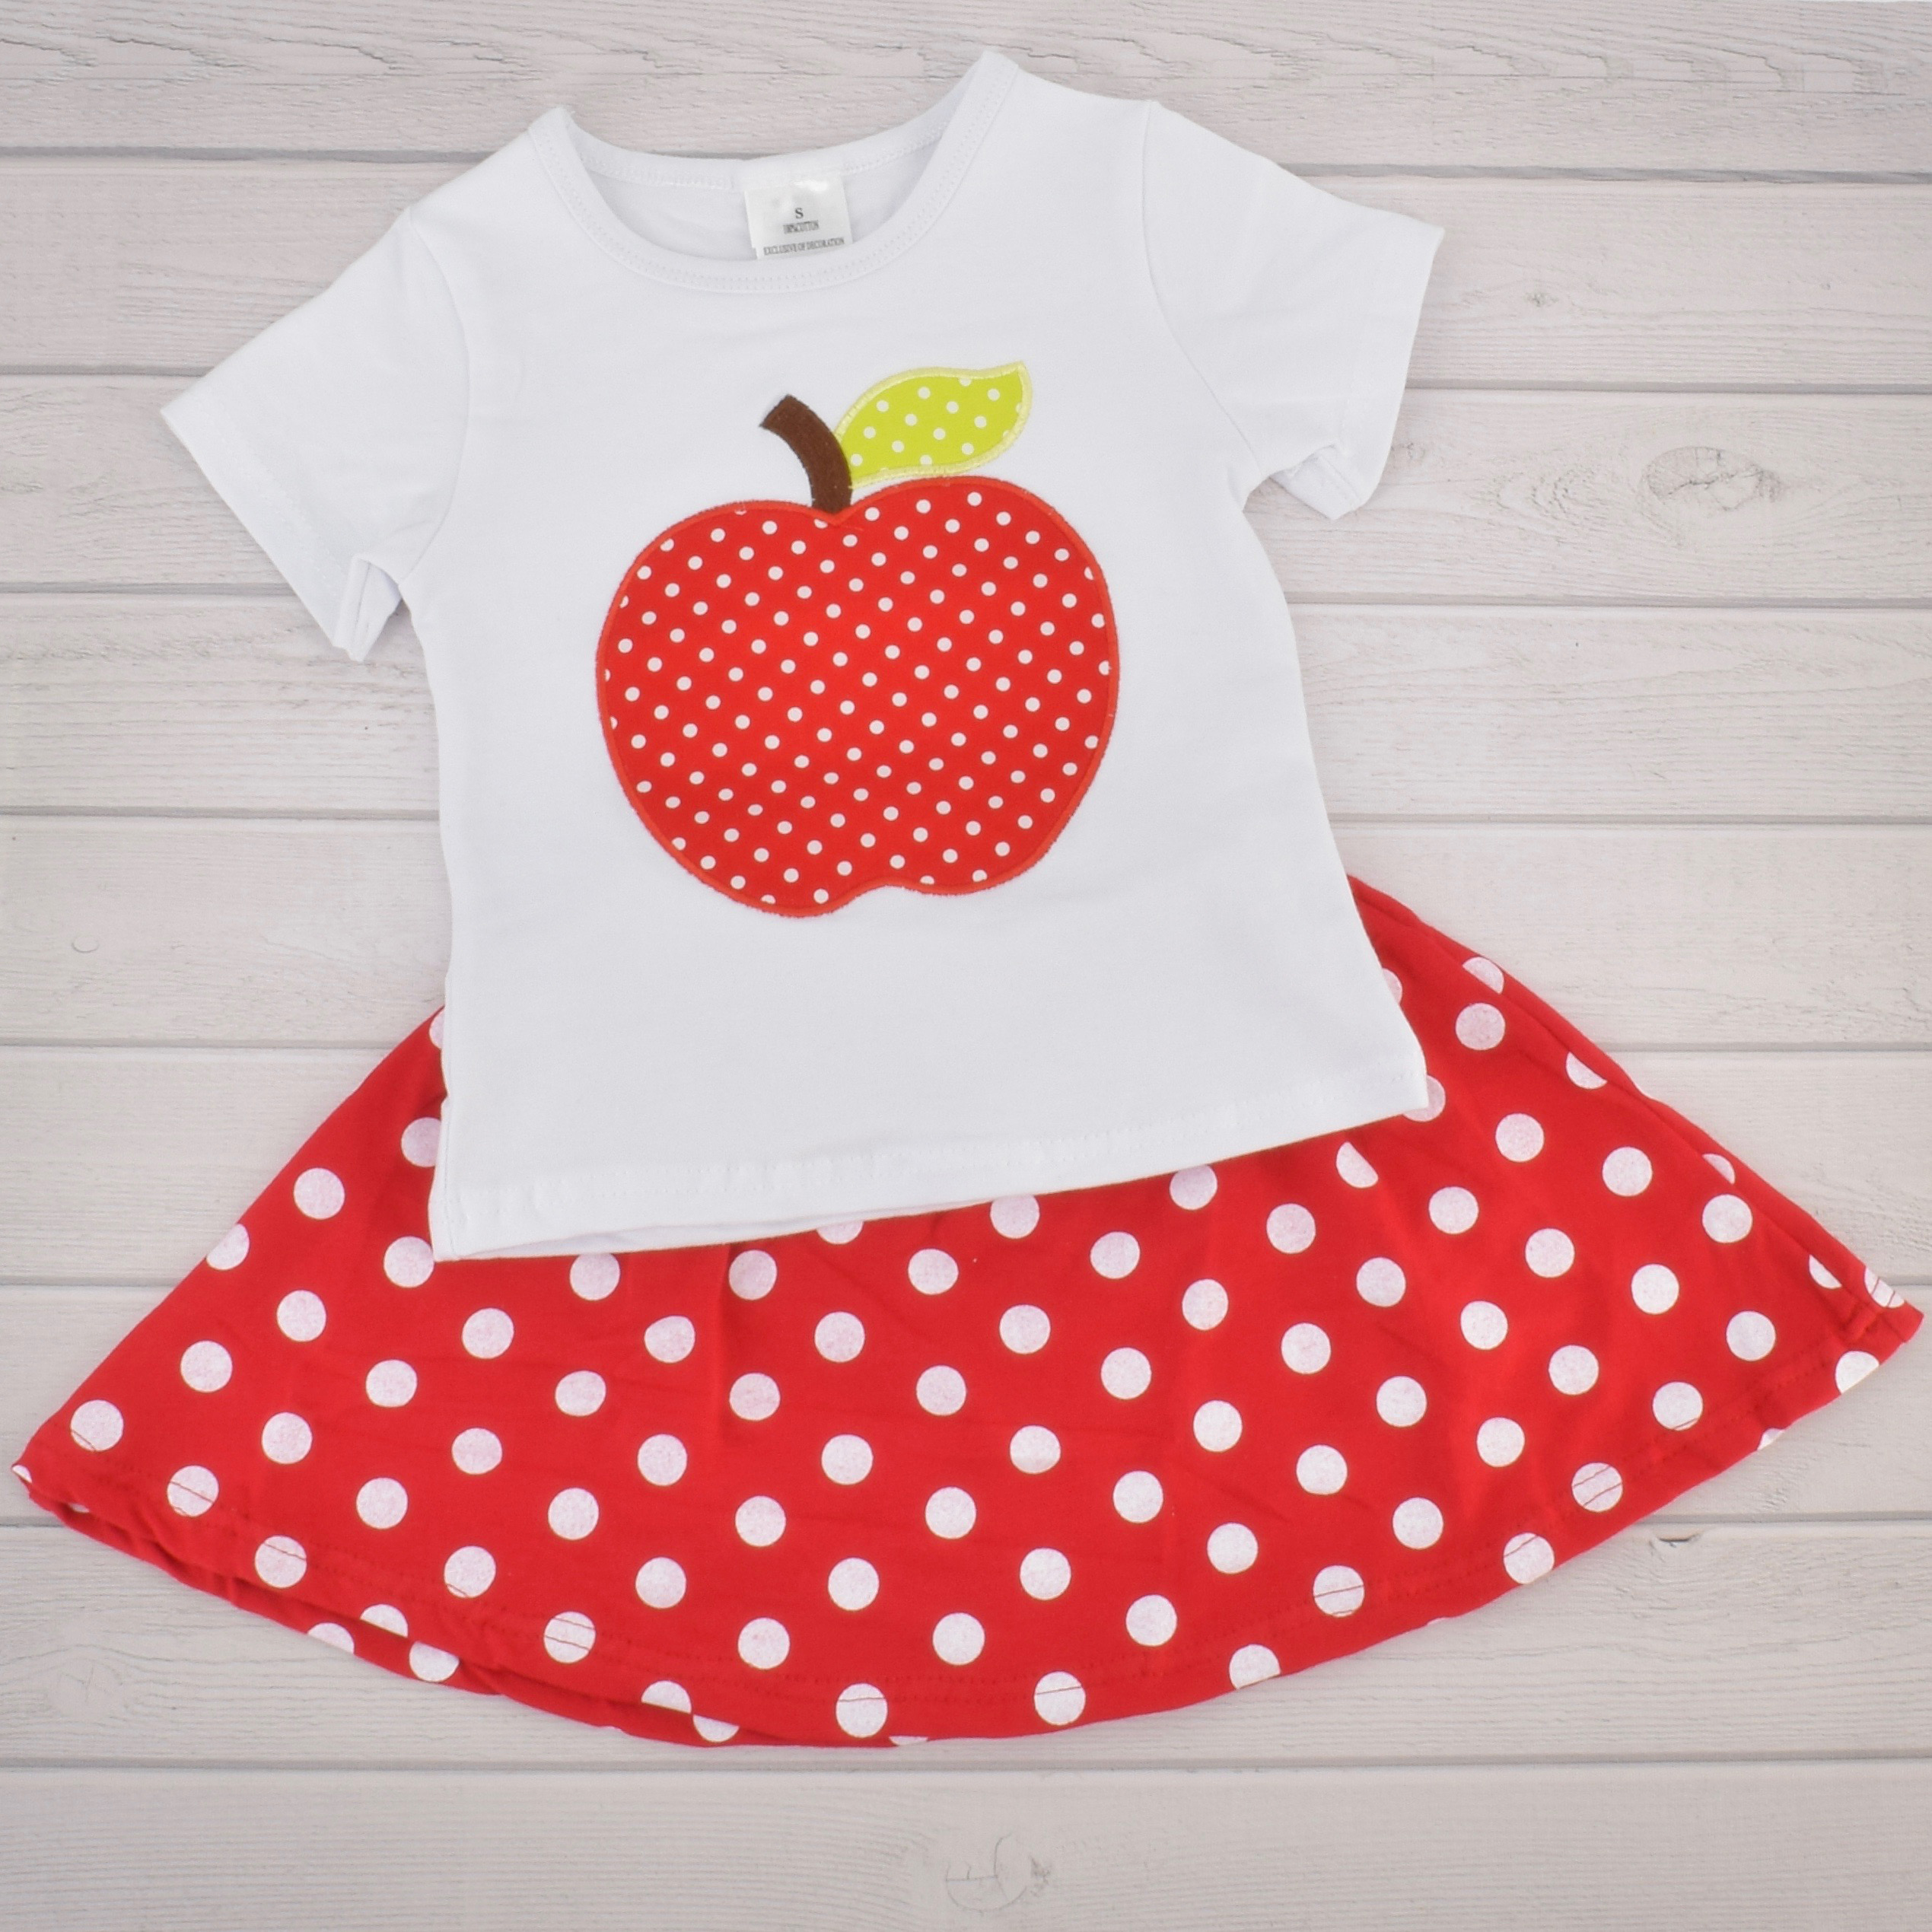 Unique Baby Girls Back to School Apple Skirt Boutique Outfit (4T/M, Red) - image 4 of 4